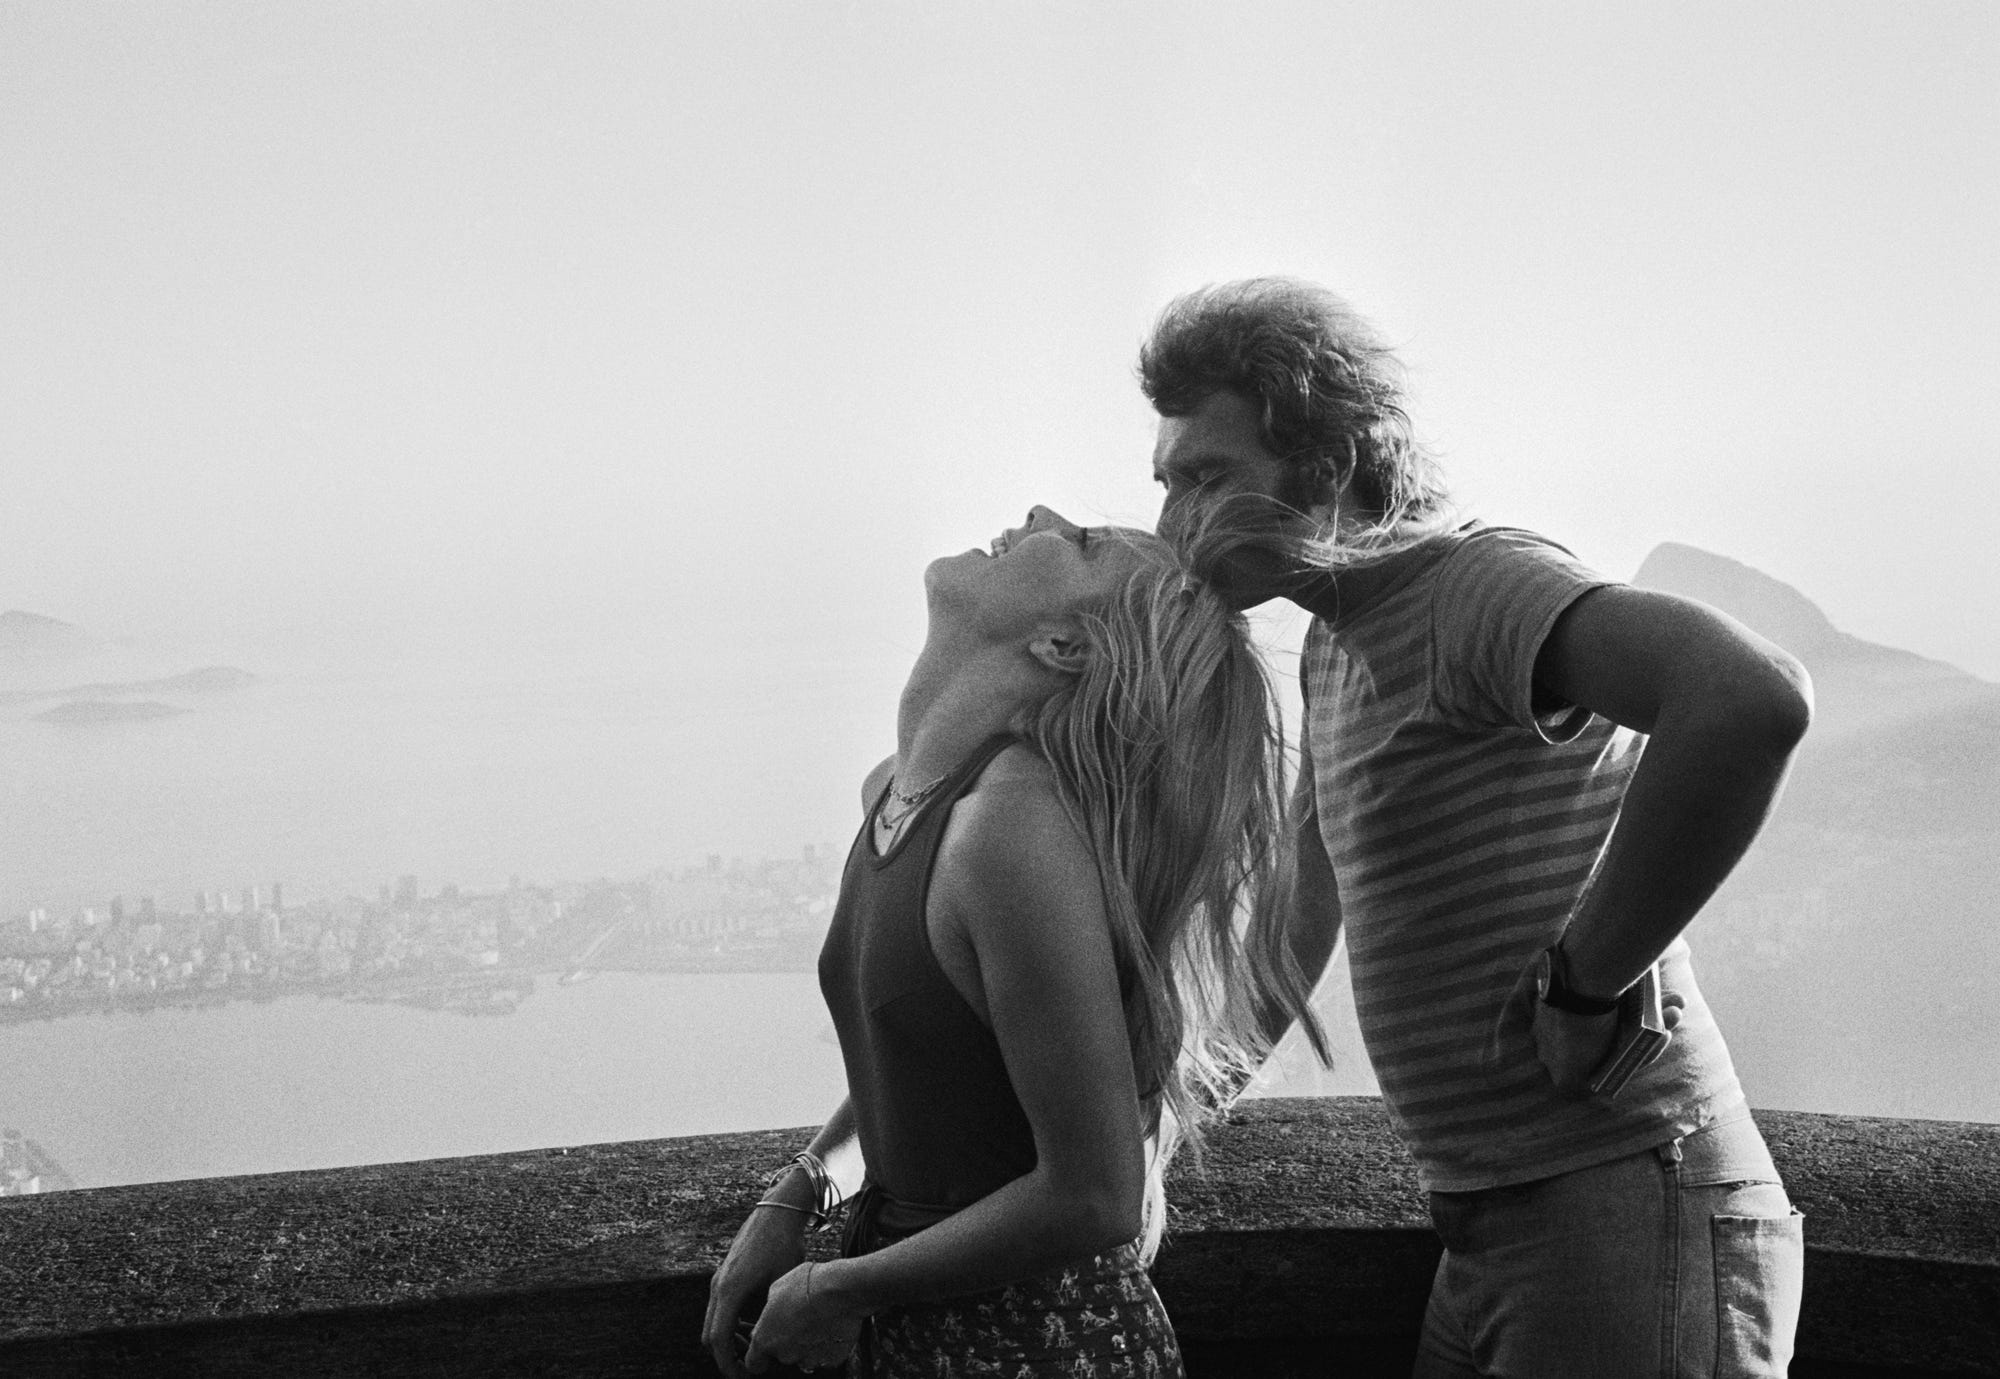 french singer sylvie vartan and husband french actor johnny hallyday in rio de janeiro, brazil photo by alain dejeansygma via getty images